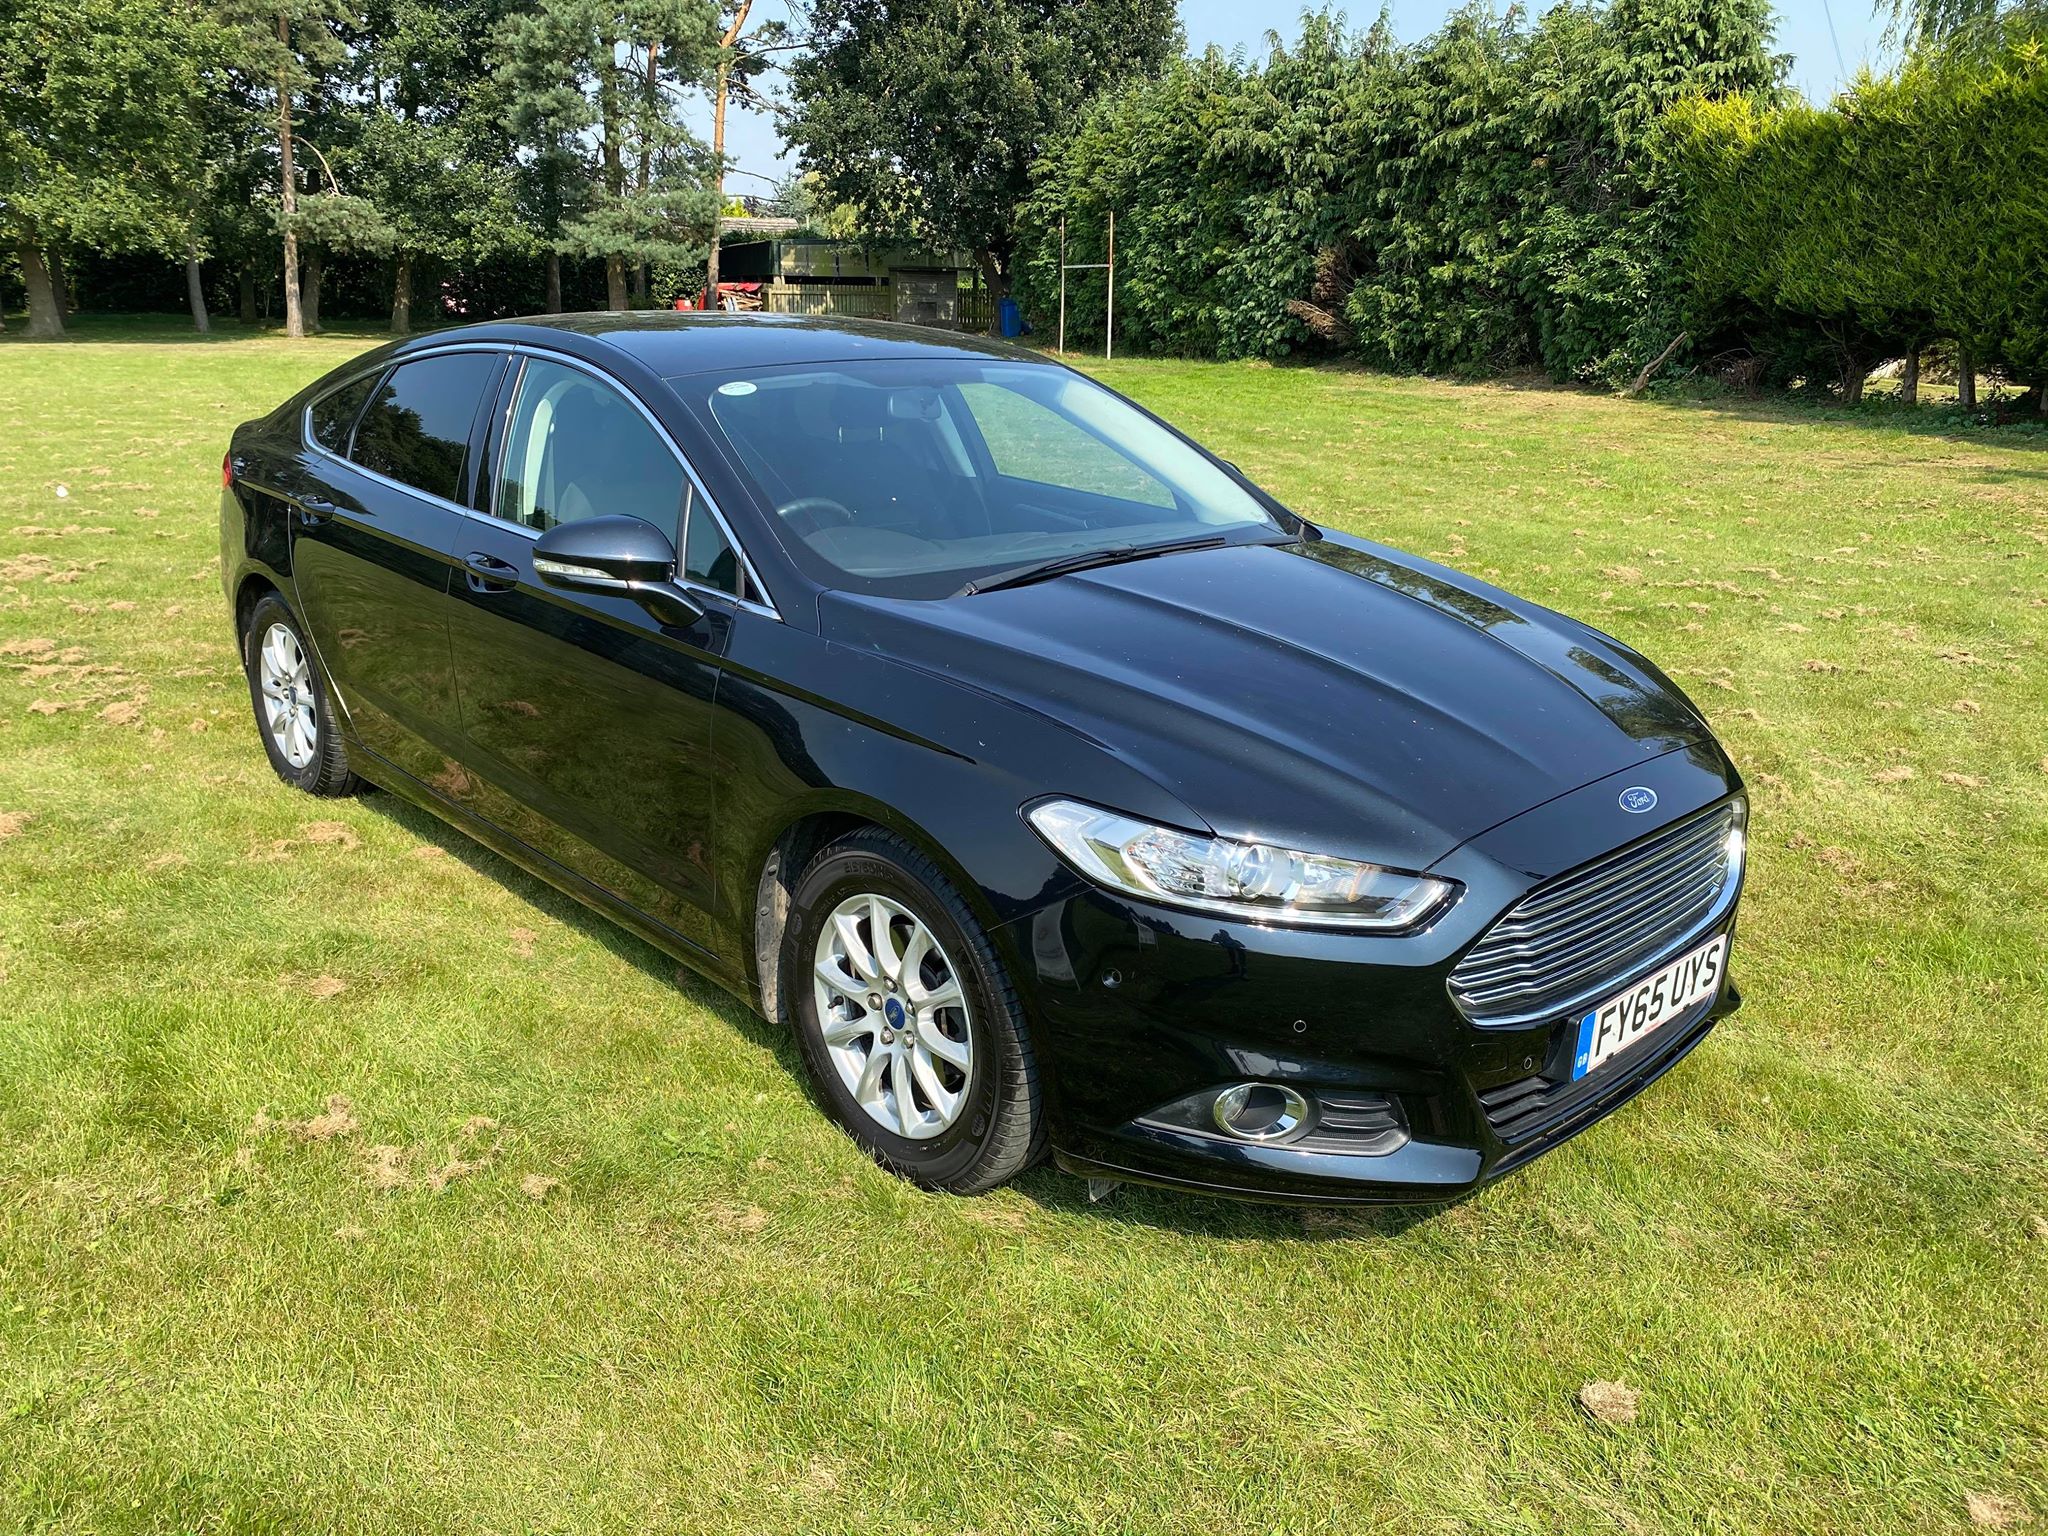 Ford Mondeo FY65 UYS